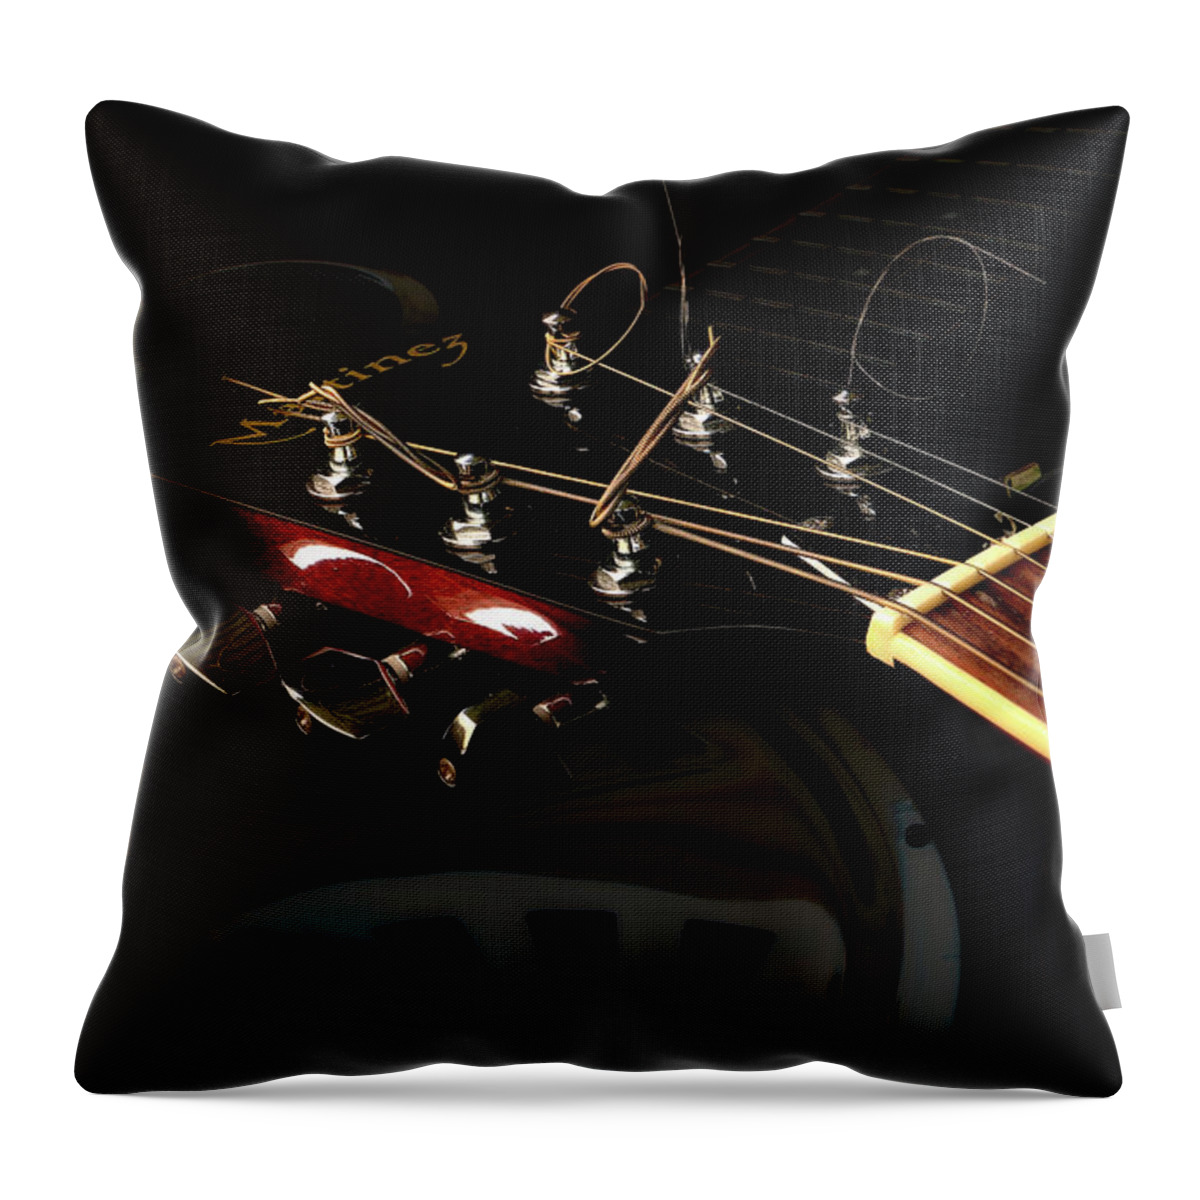 Martinez Guitar Throw Pillow featuring the photograph Martinez Guitar 003 by Kevin Chippindall